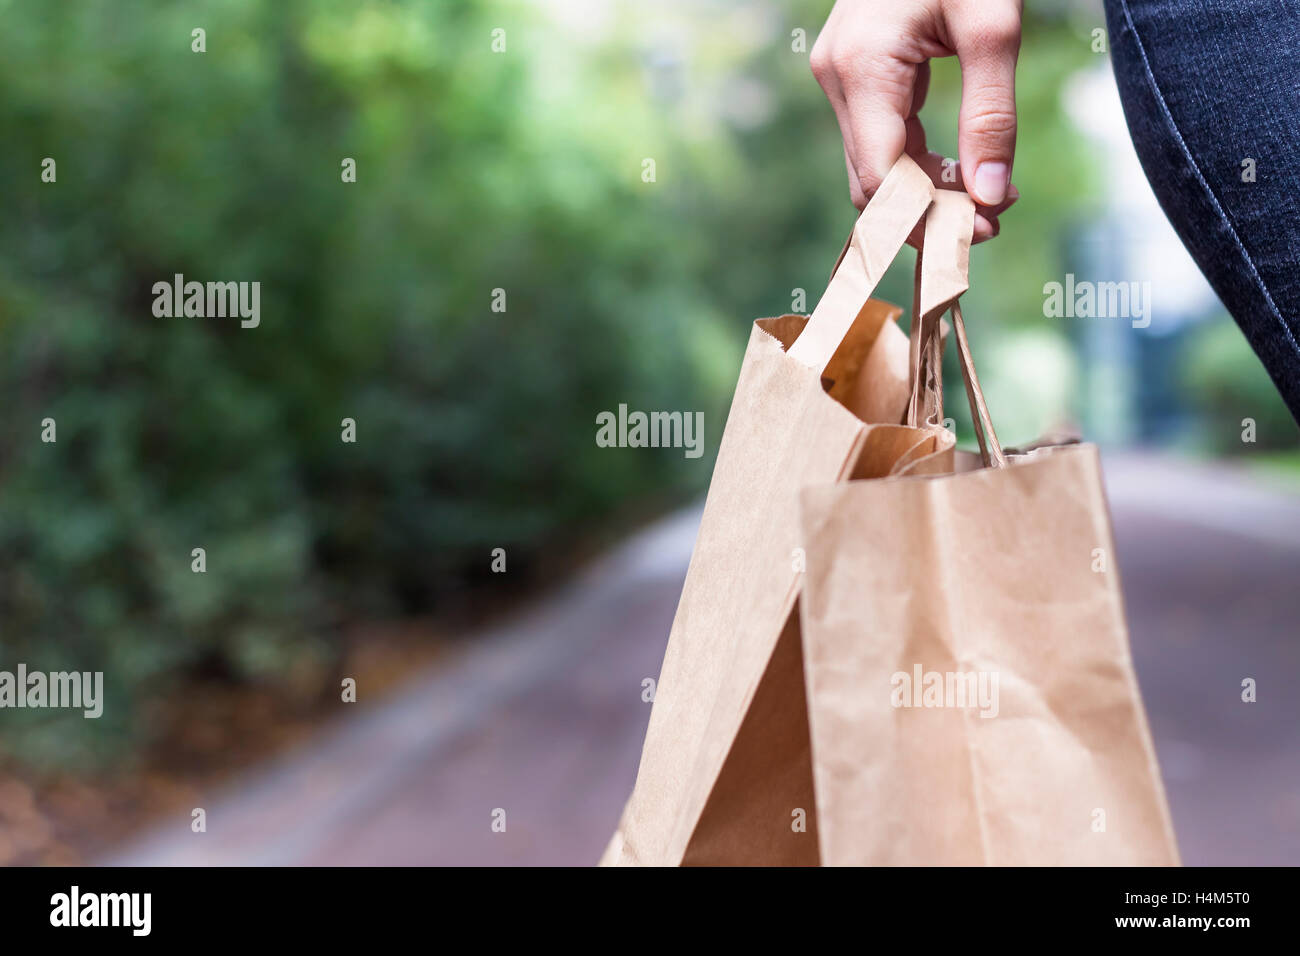 Girl doing ecological shopping with paper bags in hand Stock Photo